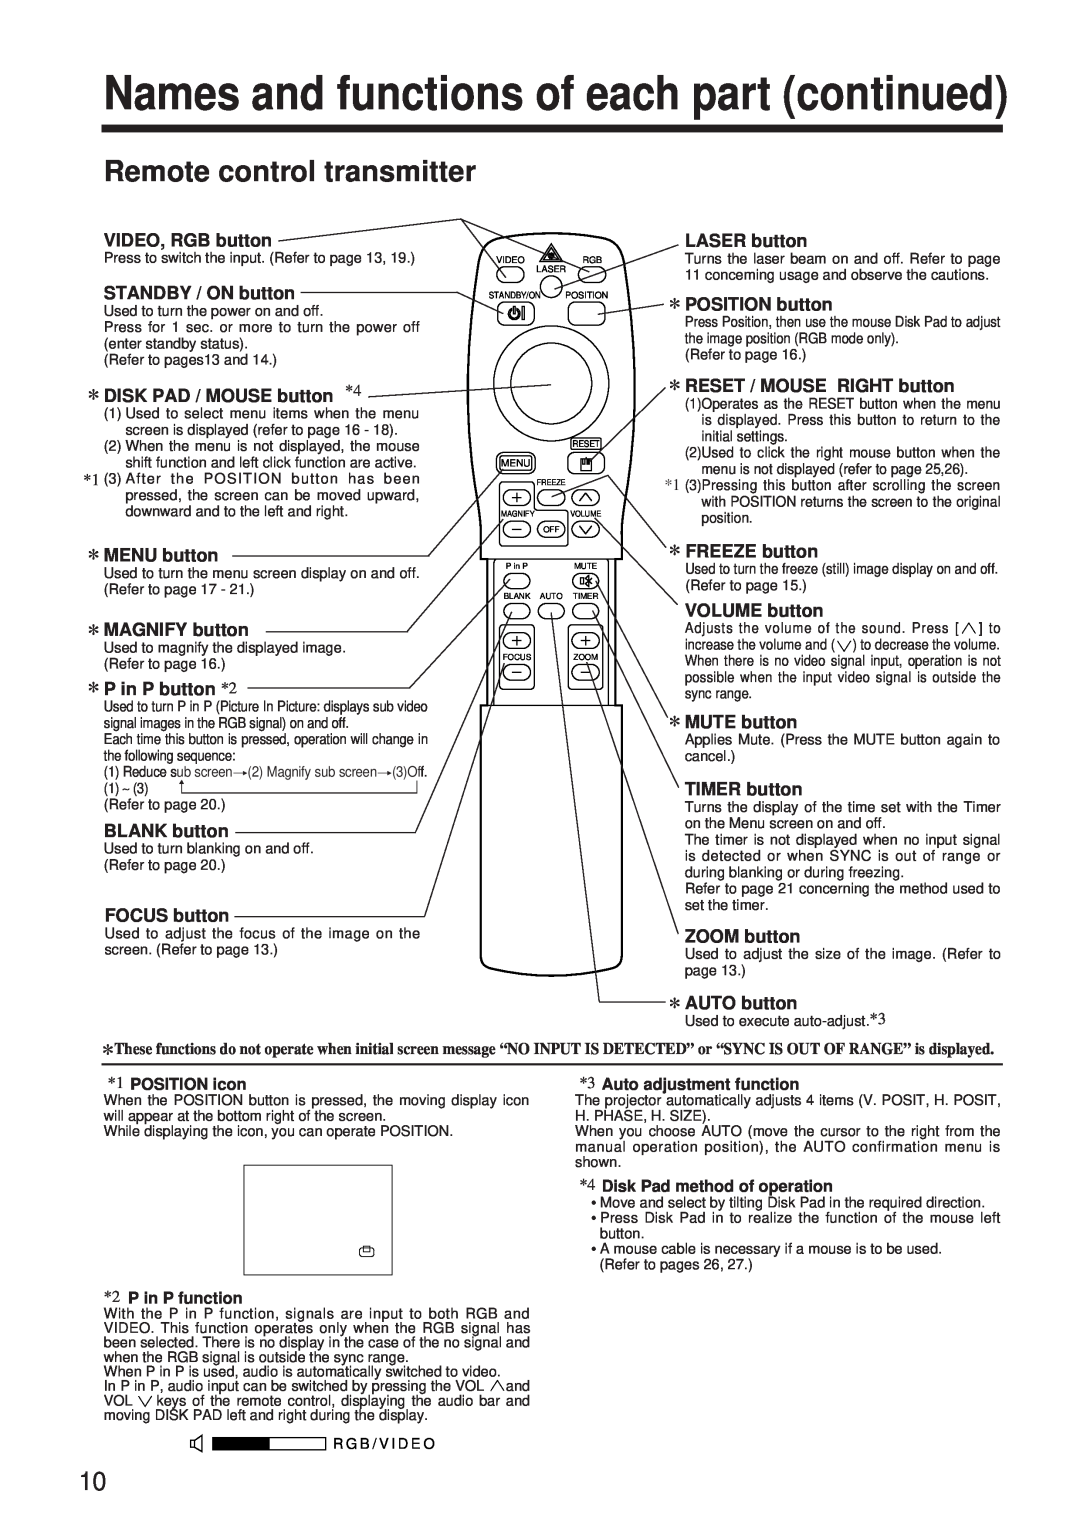 BOXLIGHT MP-650i user manual Names and functions of each part continued, Remote control transmitter 